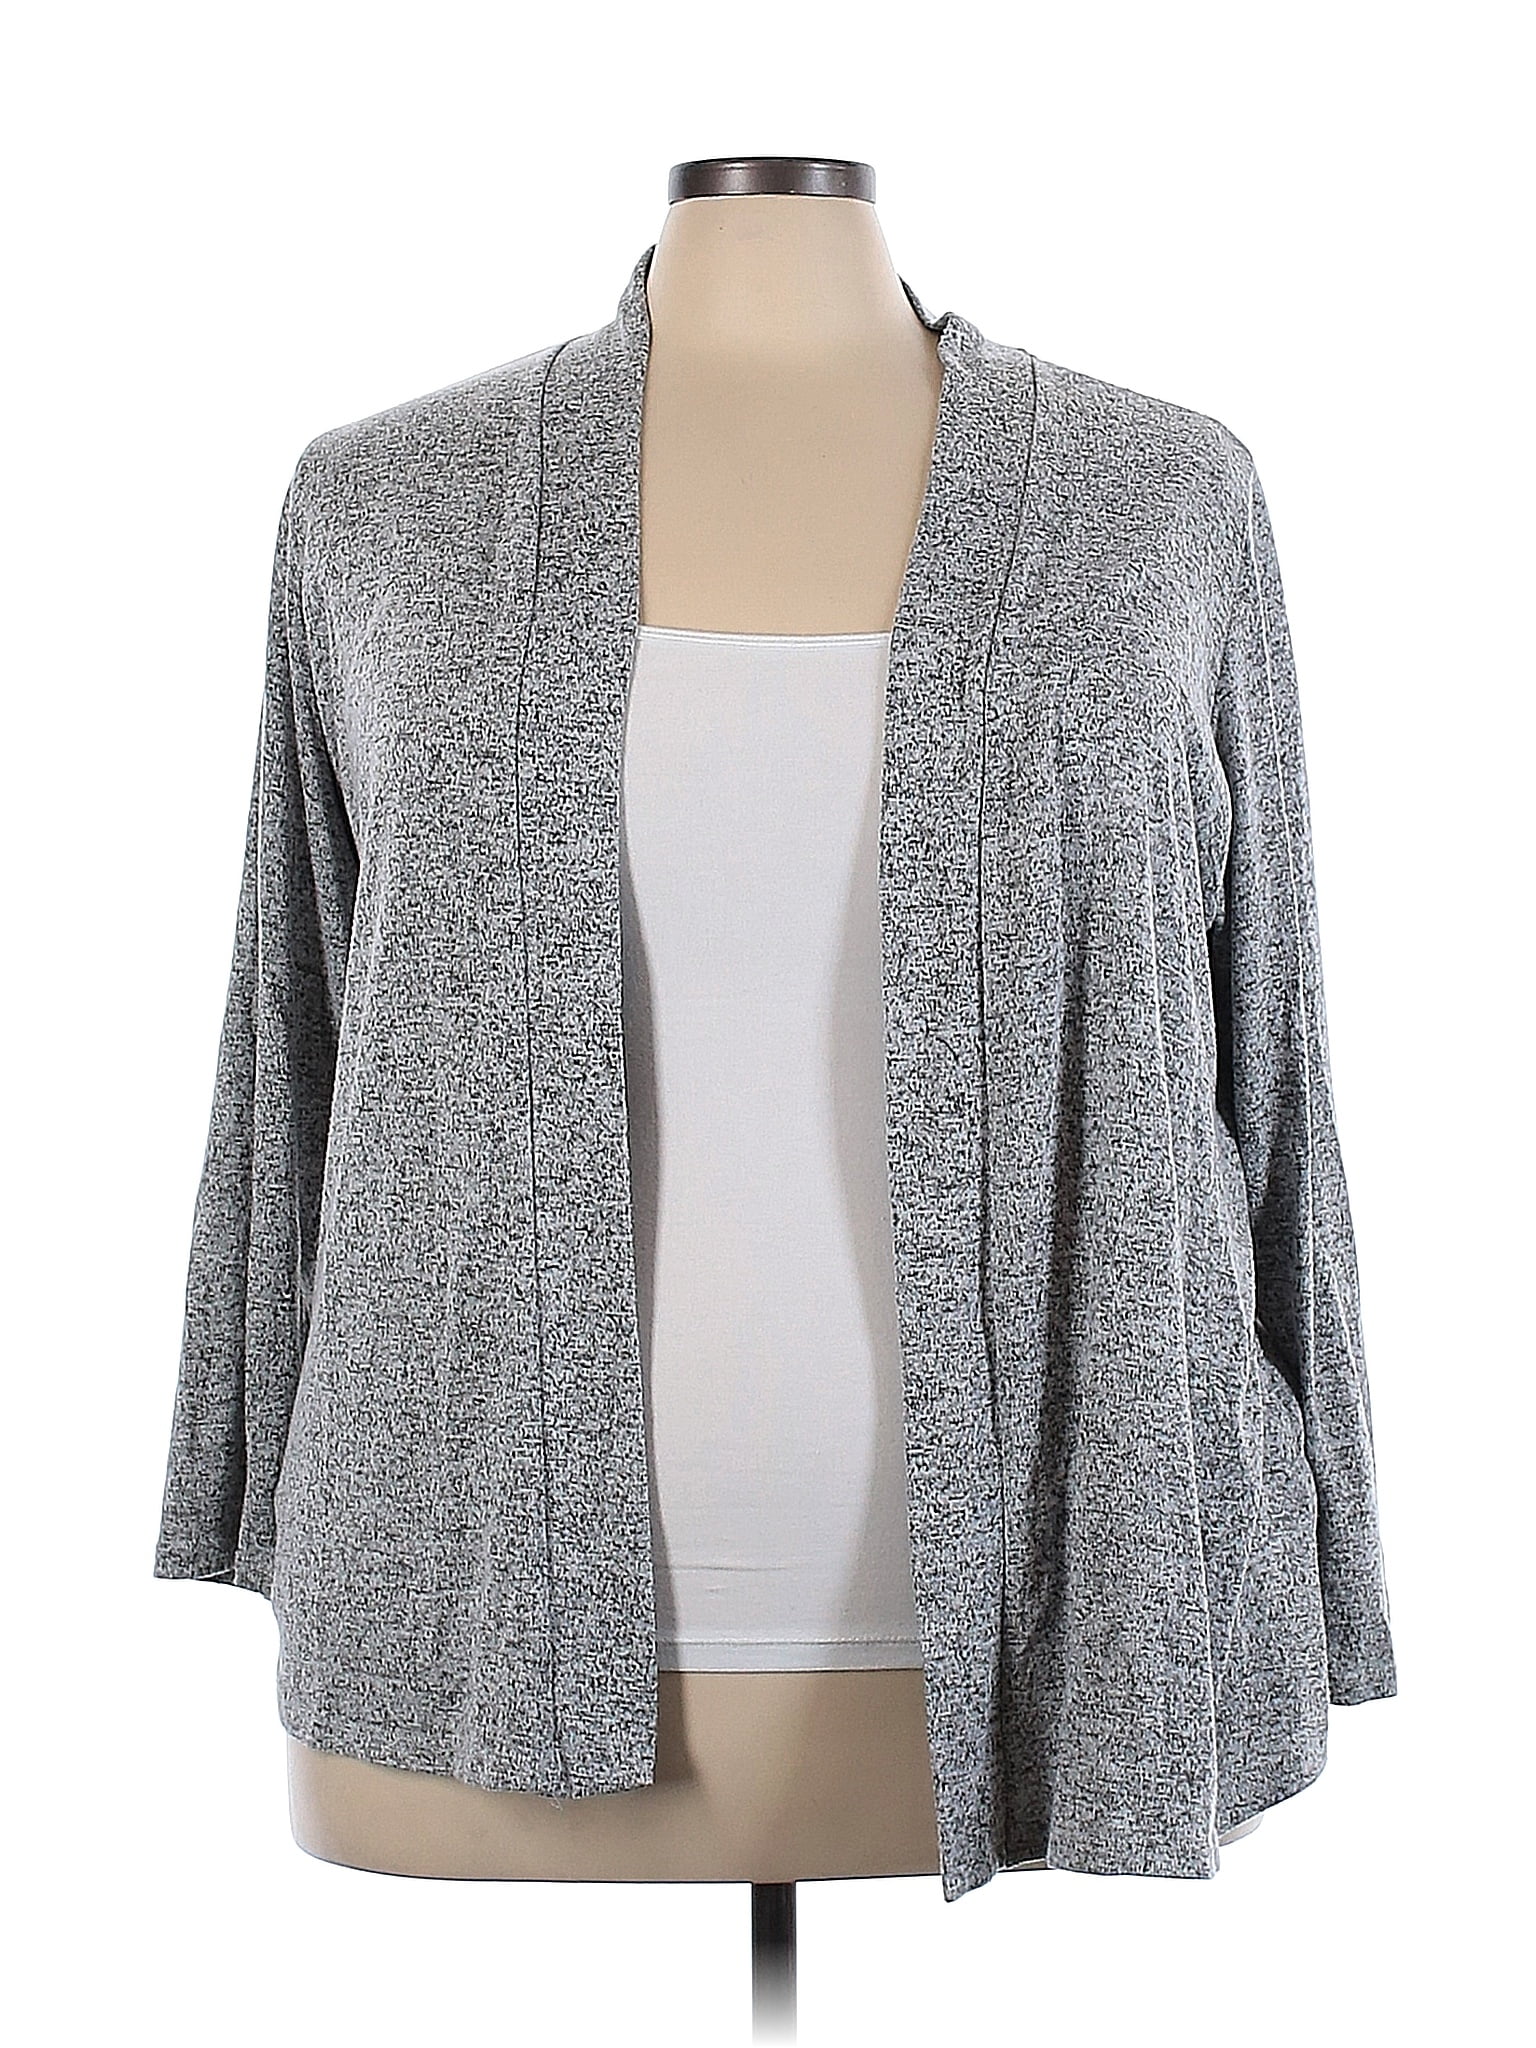 Mix by 41 Hawthorn Color Block Marled Gray Cardigan Size 3X (Plus) - 68 ...